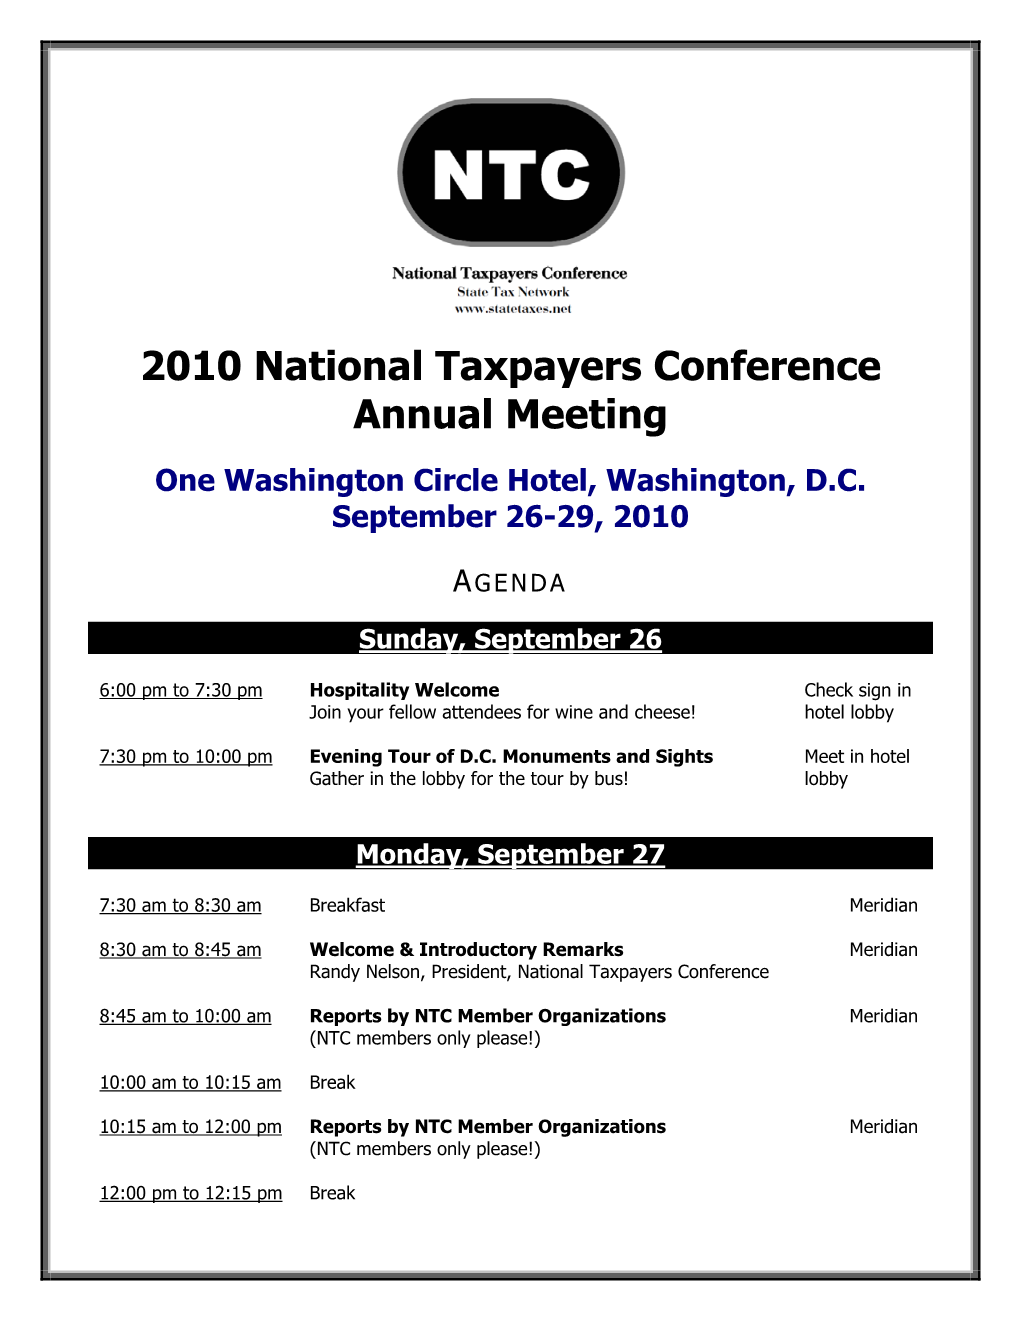 2010 National Taxpayers Conference Annual Meeting